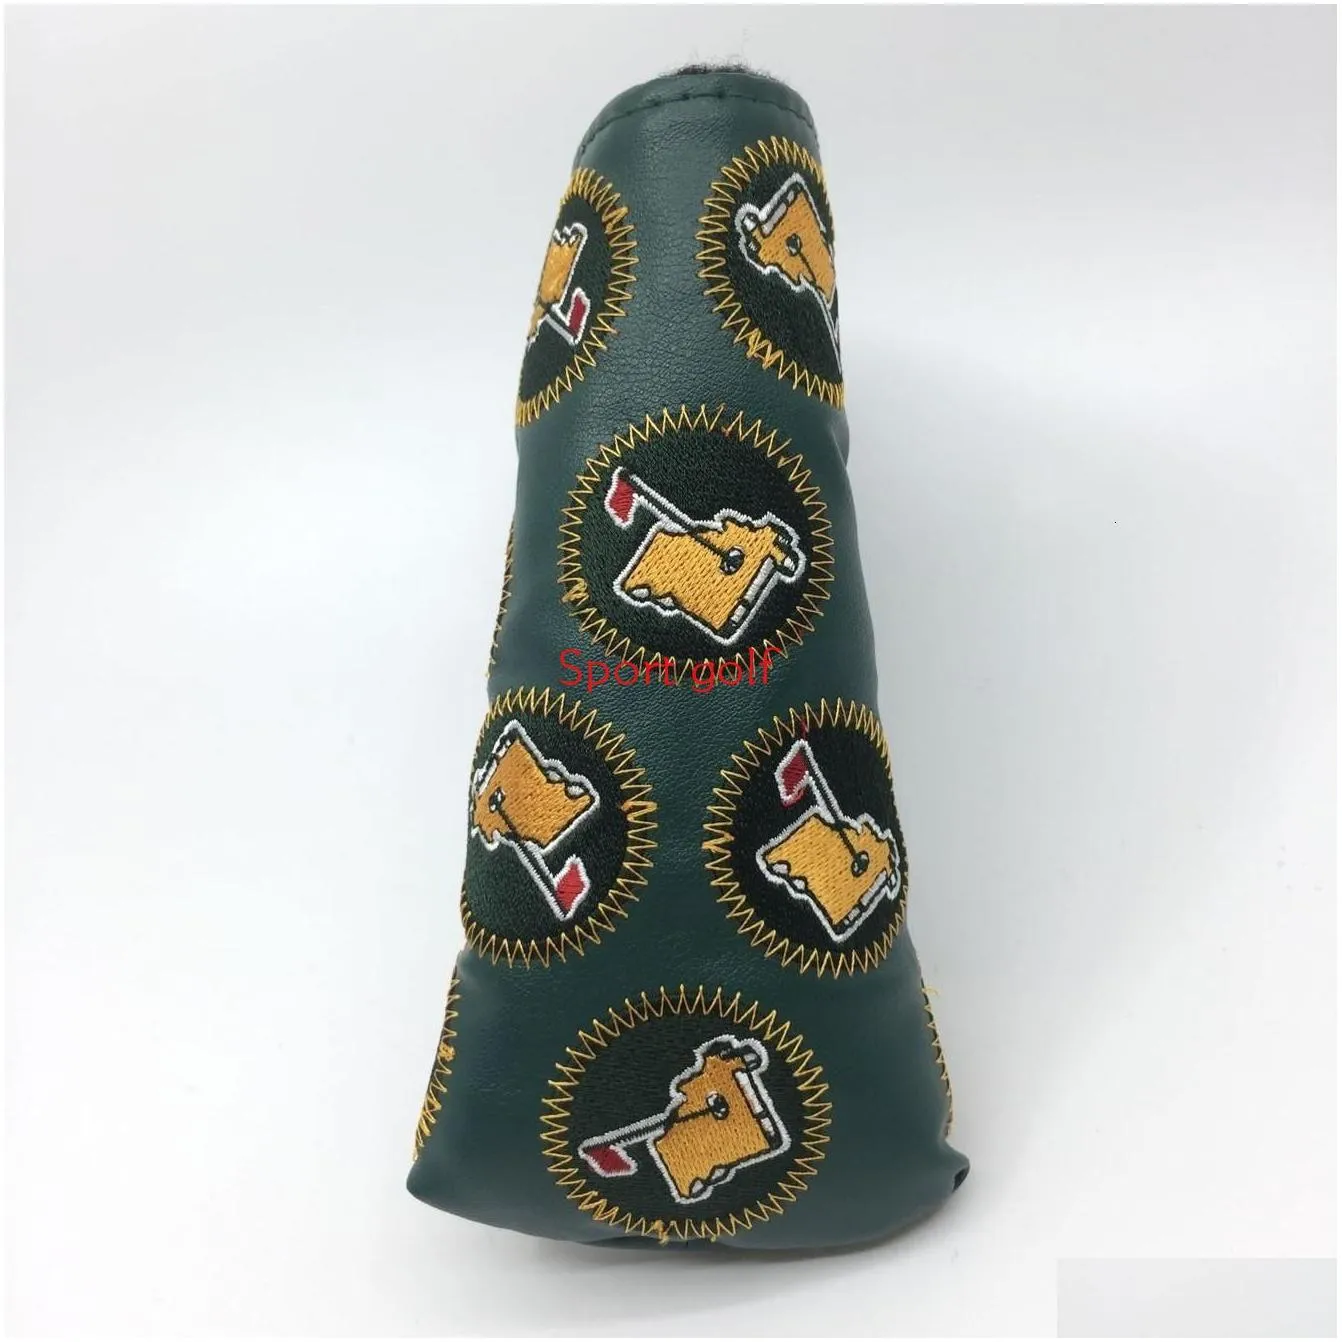 Other Golf Products Cherried Embroidery Club Blade Putter Headcover Verclo Closed All Kinds Of Head Protect Cover 230413